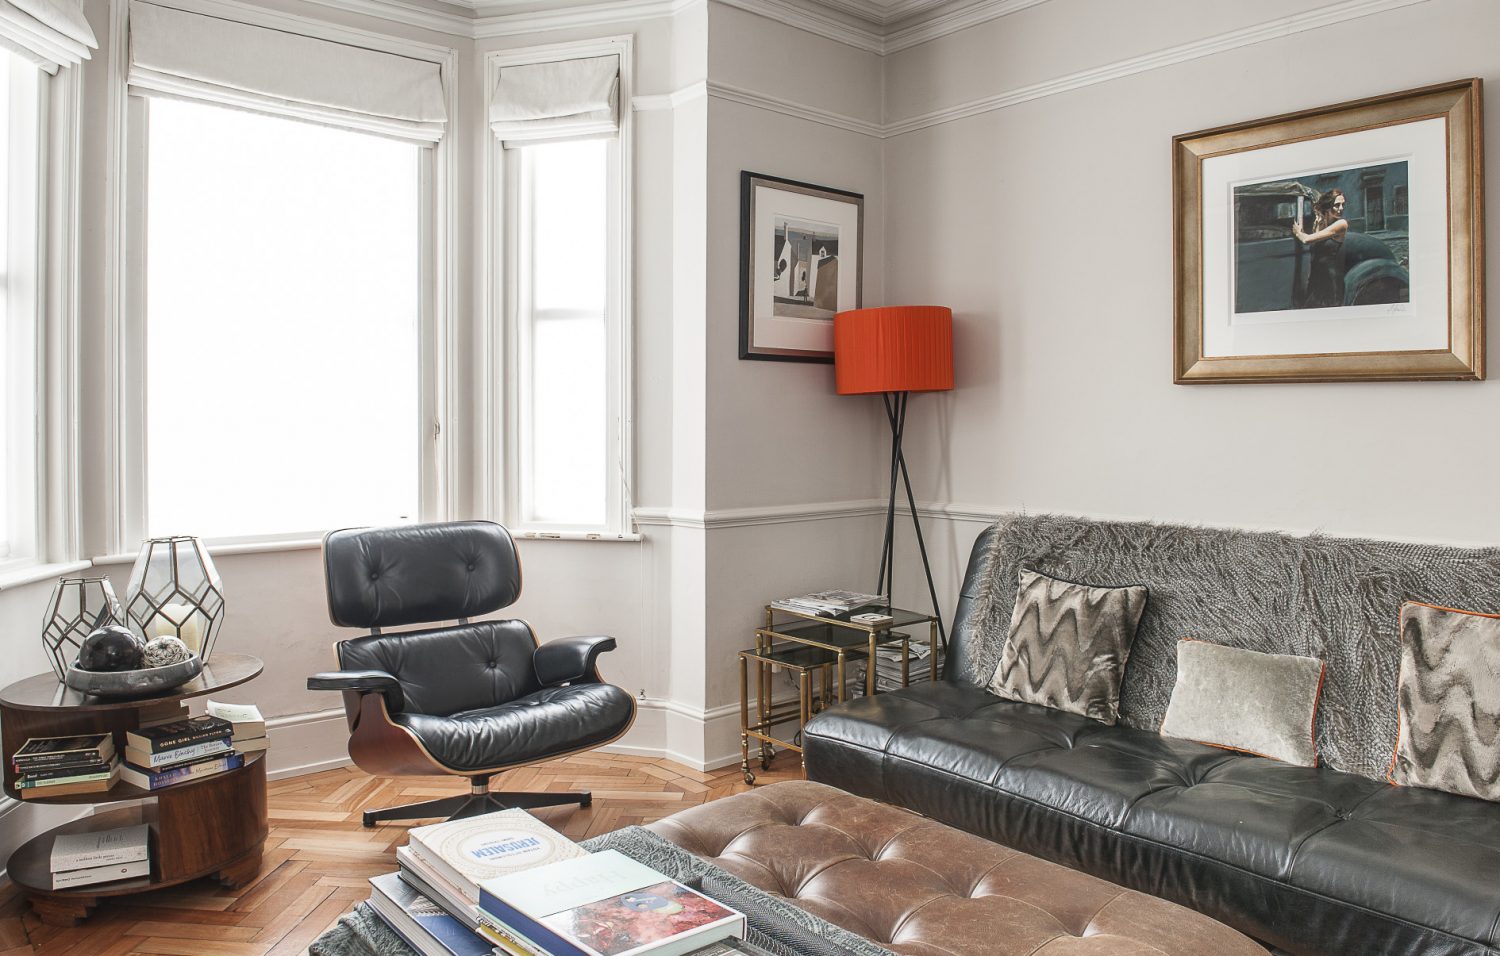 Justine describes the living room, which is at the front of the house, as a ‘work in progress’. Even so, the subtle paint scheme and signature pieces of furniture, including a Charles Eames chair and a Hans Wegner rocker, give it understated style